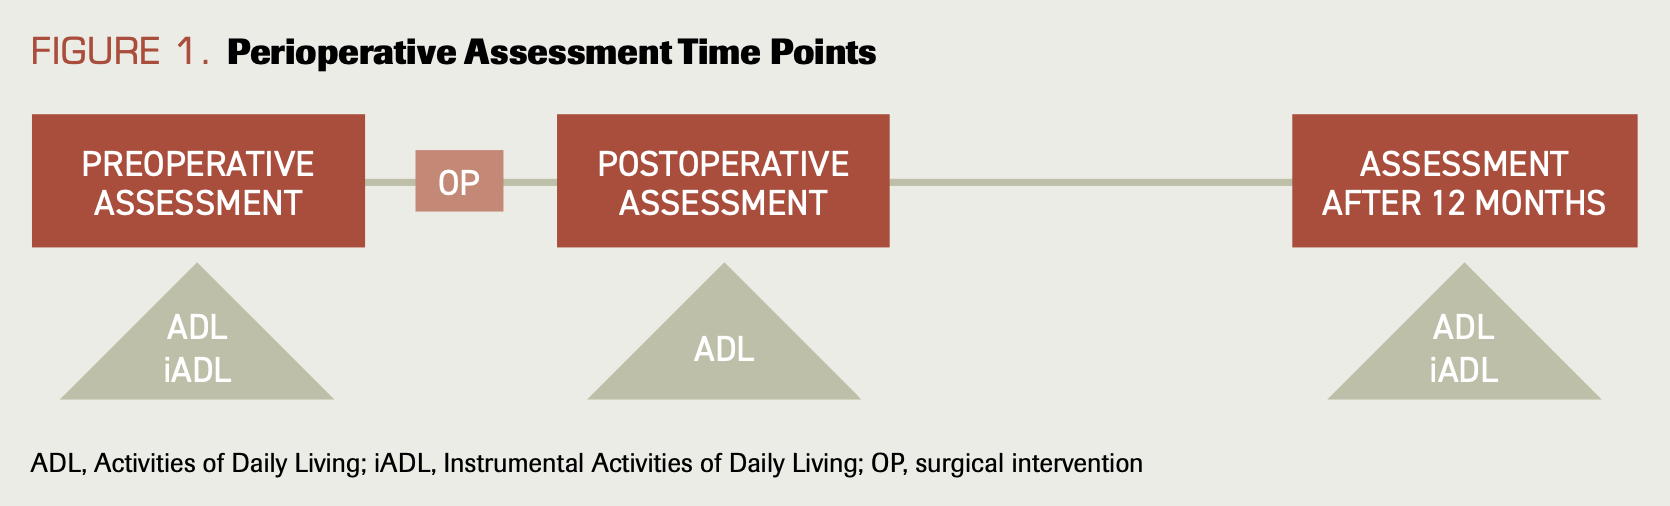 FIGURE 1. Perioperative Assessment Time Points